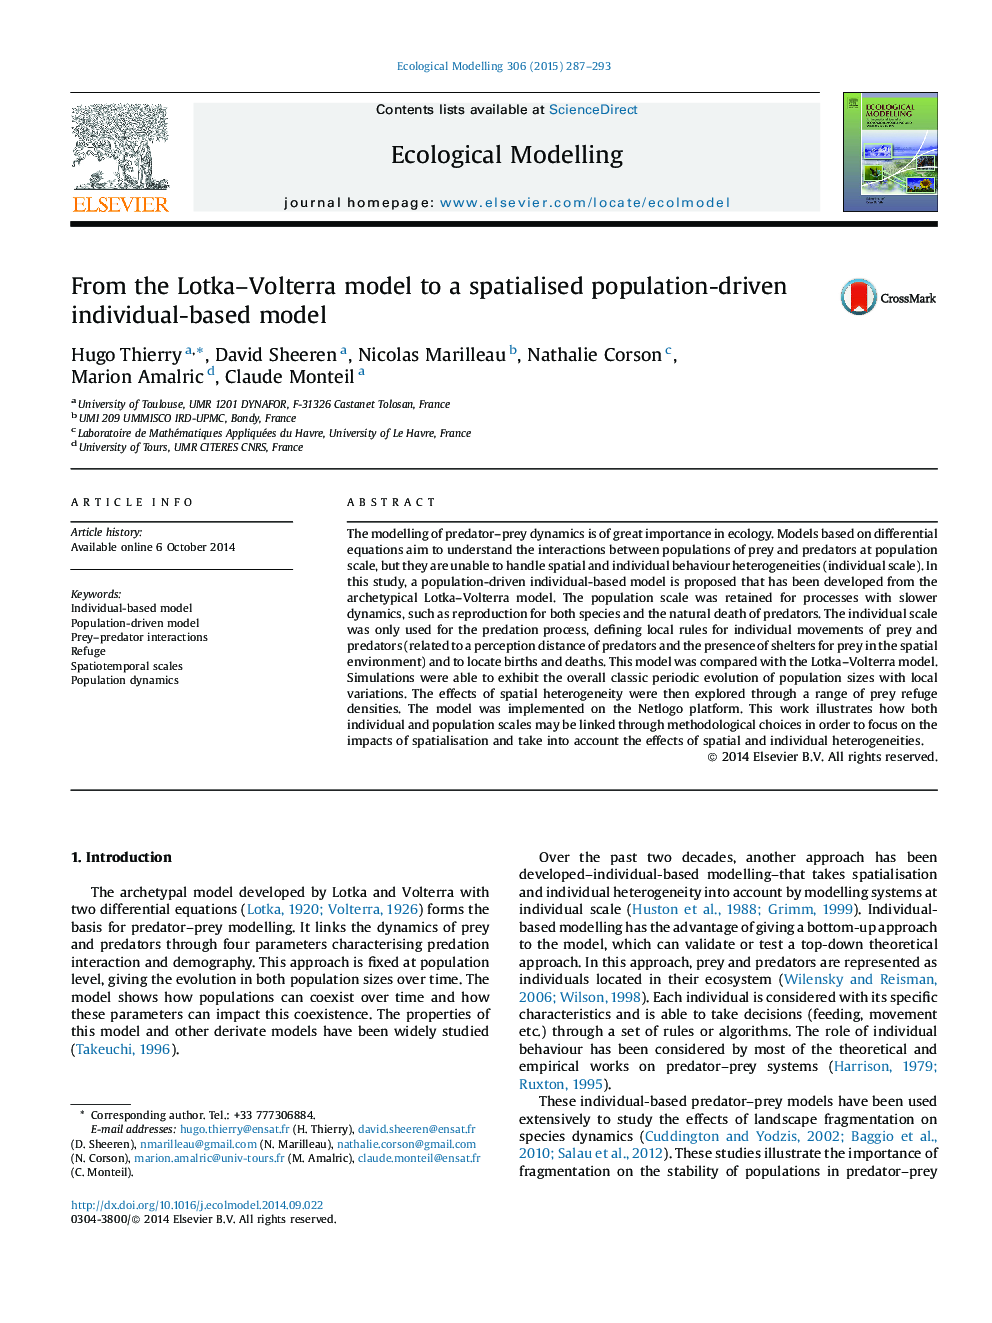 From the Lotka-Volterra model to a spatialised population-driven individual-based model